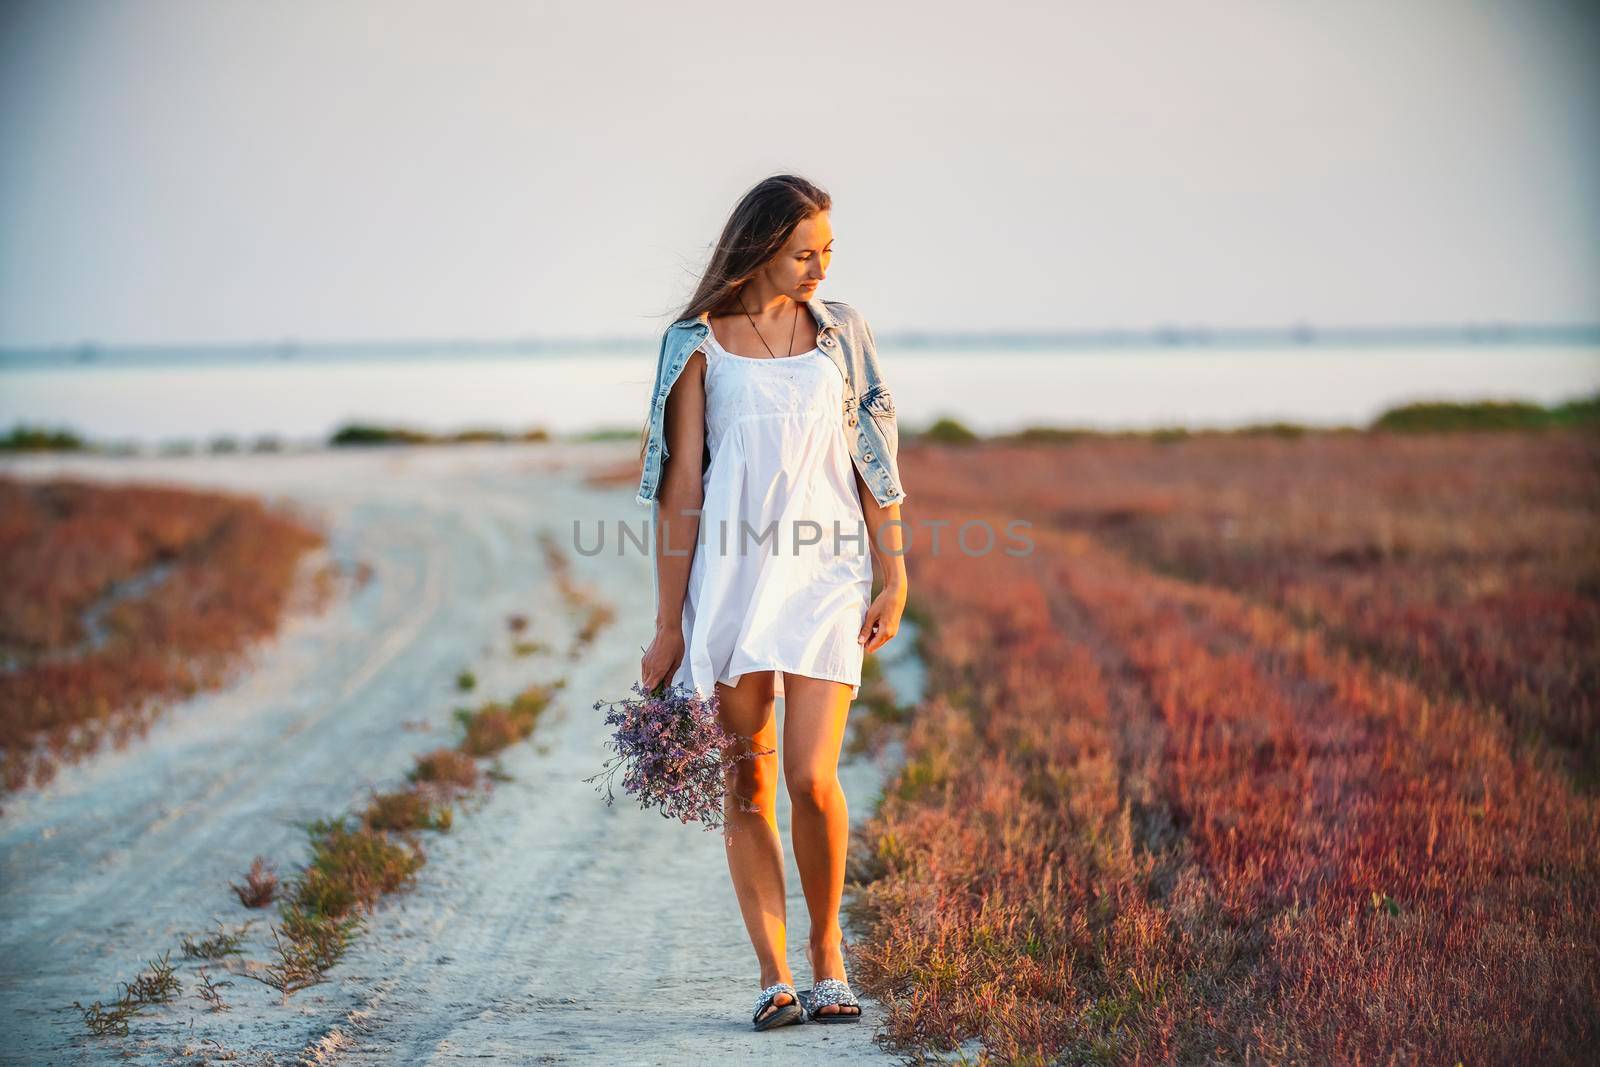 Woman with a bouquet of flowers walking on the road against the background of the sea